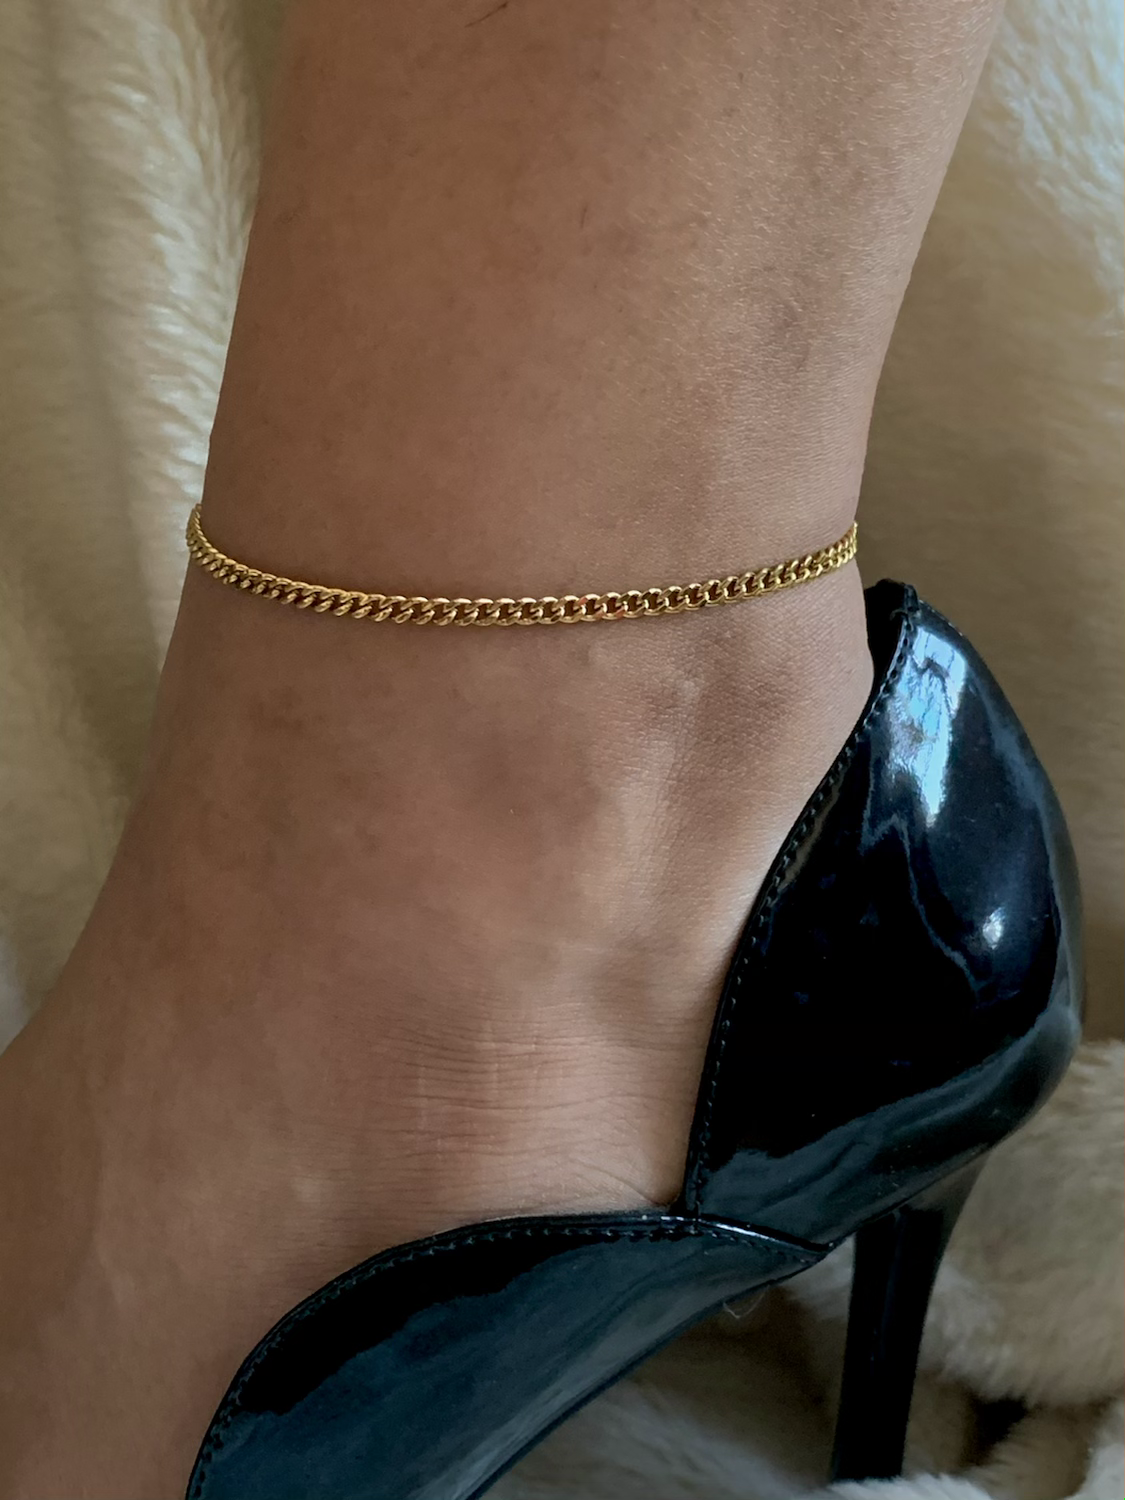 Small link anklet